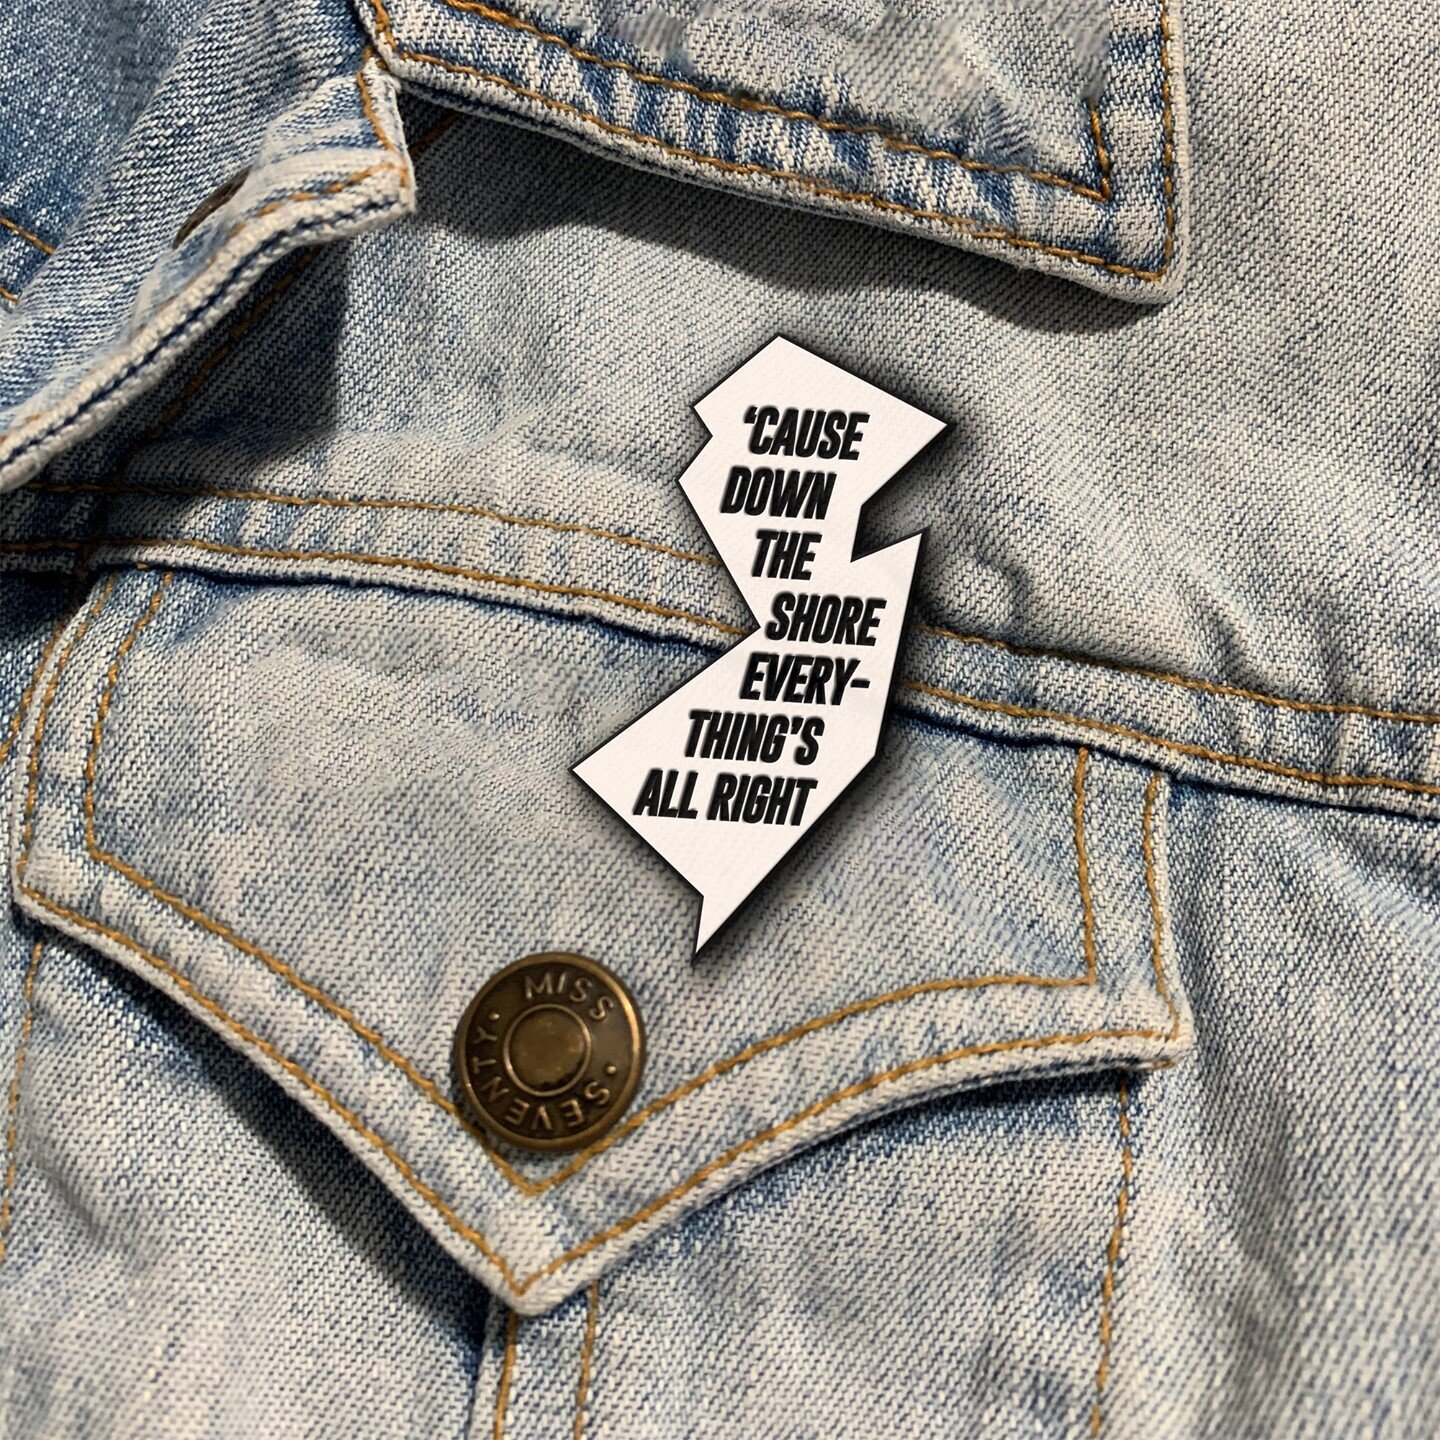 'Cause down the shore everything's all right... 🎶

Be among the first 500 new registrations for the 2021 (in-person or virtual) and you will receive a collectors enamel pin!